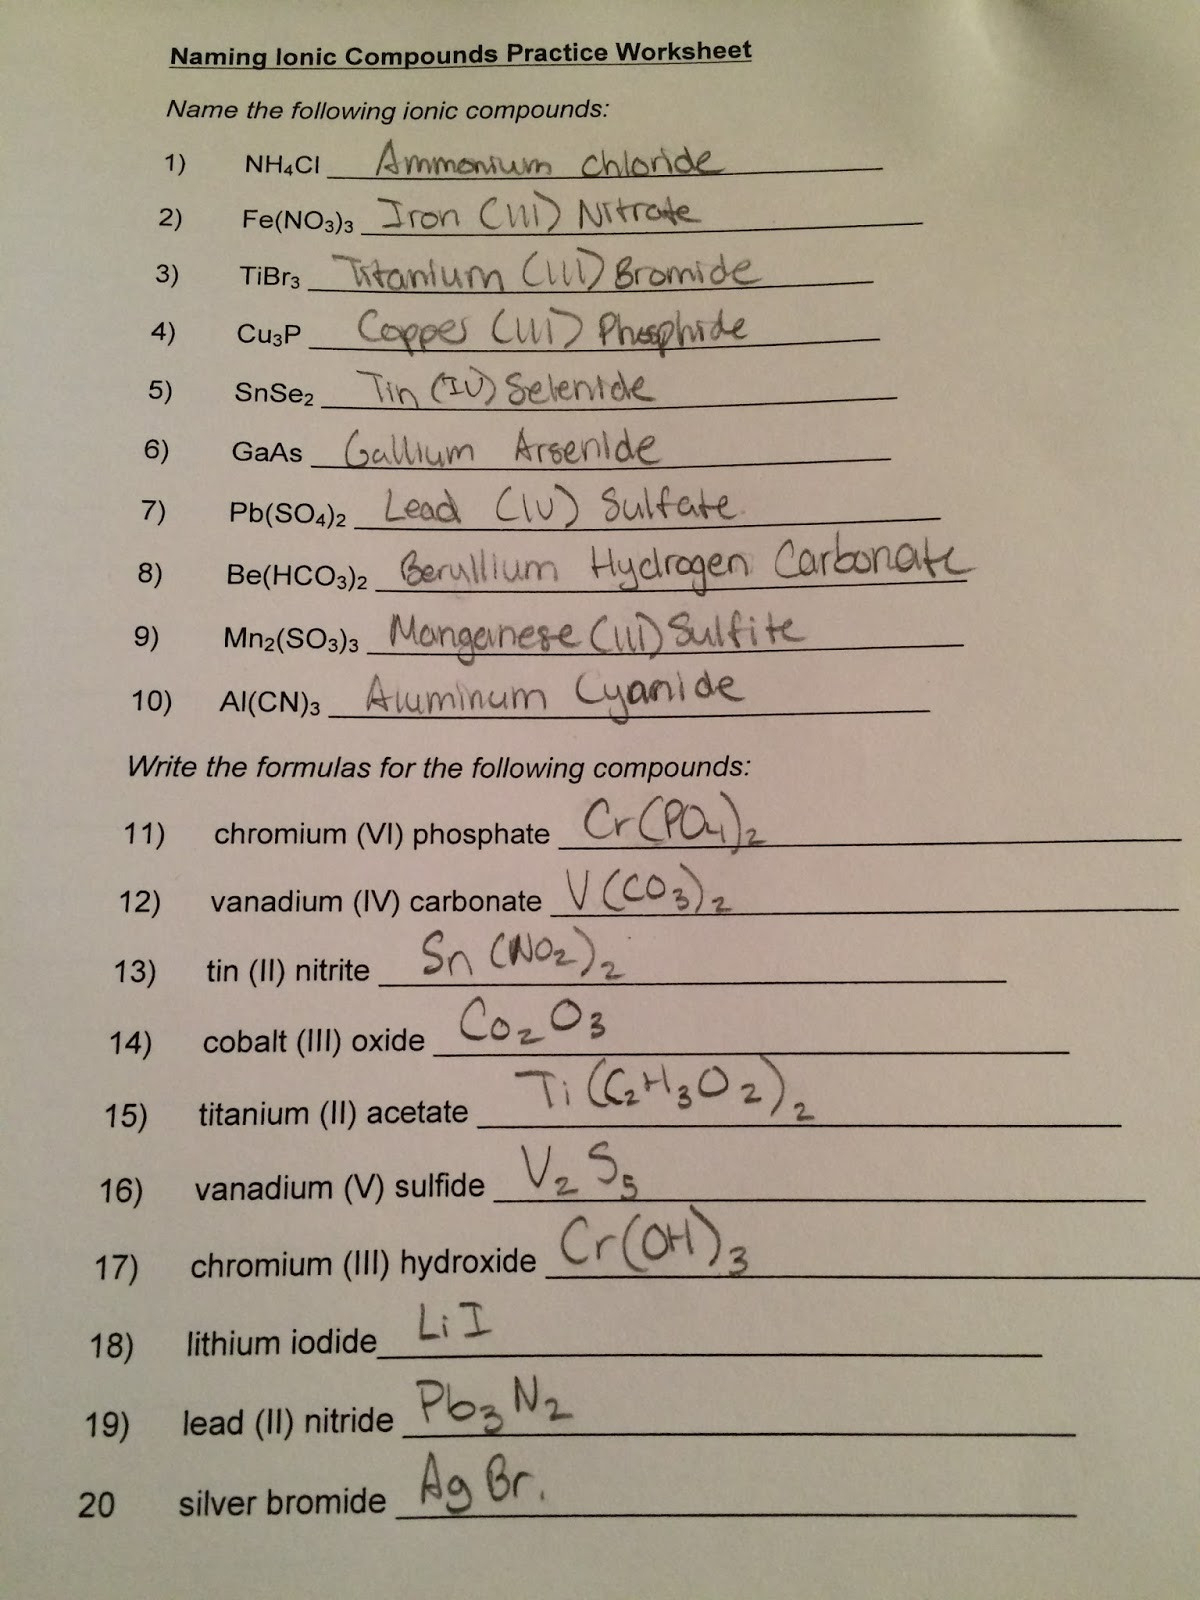 all-ionic-compounds-worksheets-answers-db-excel-compoundworksheets